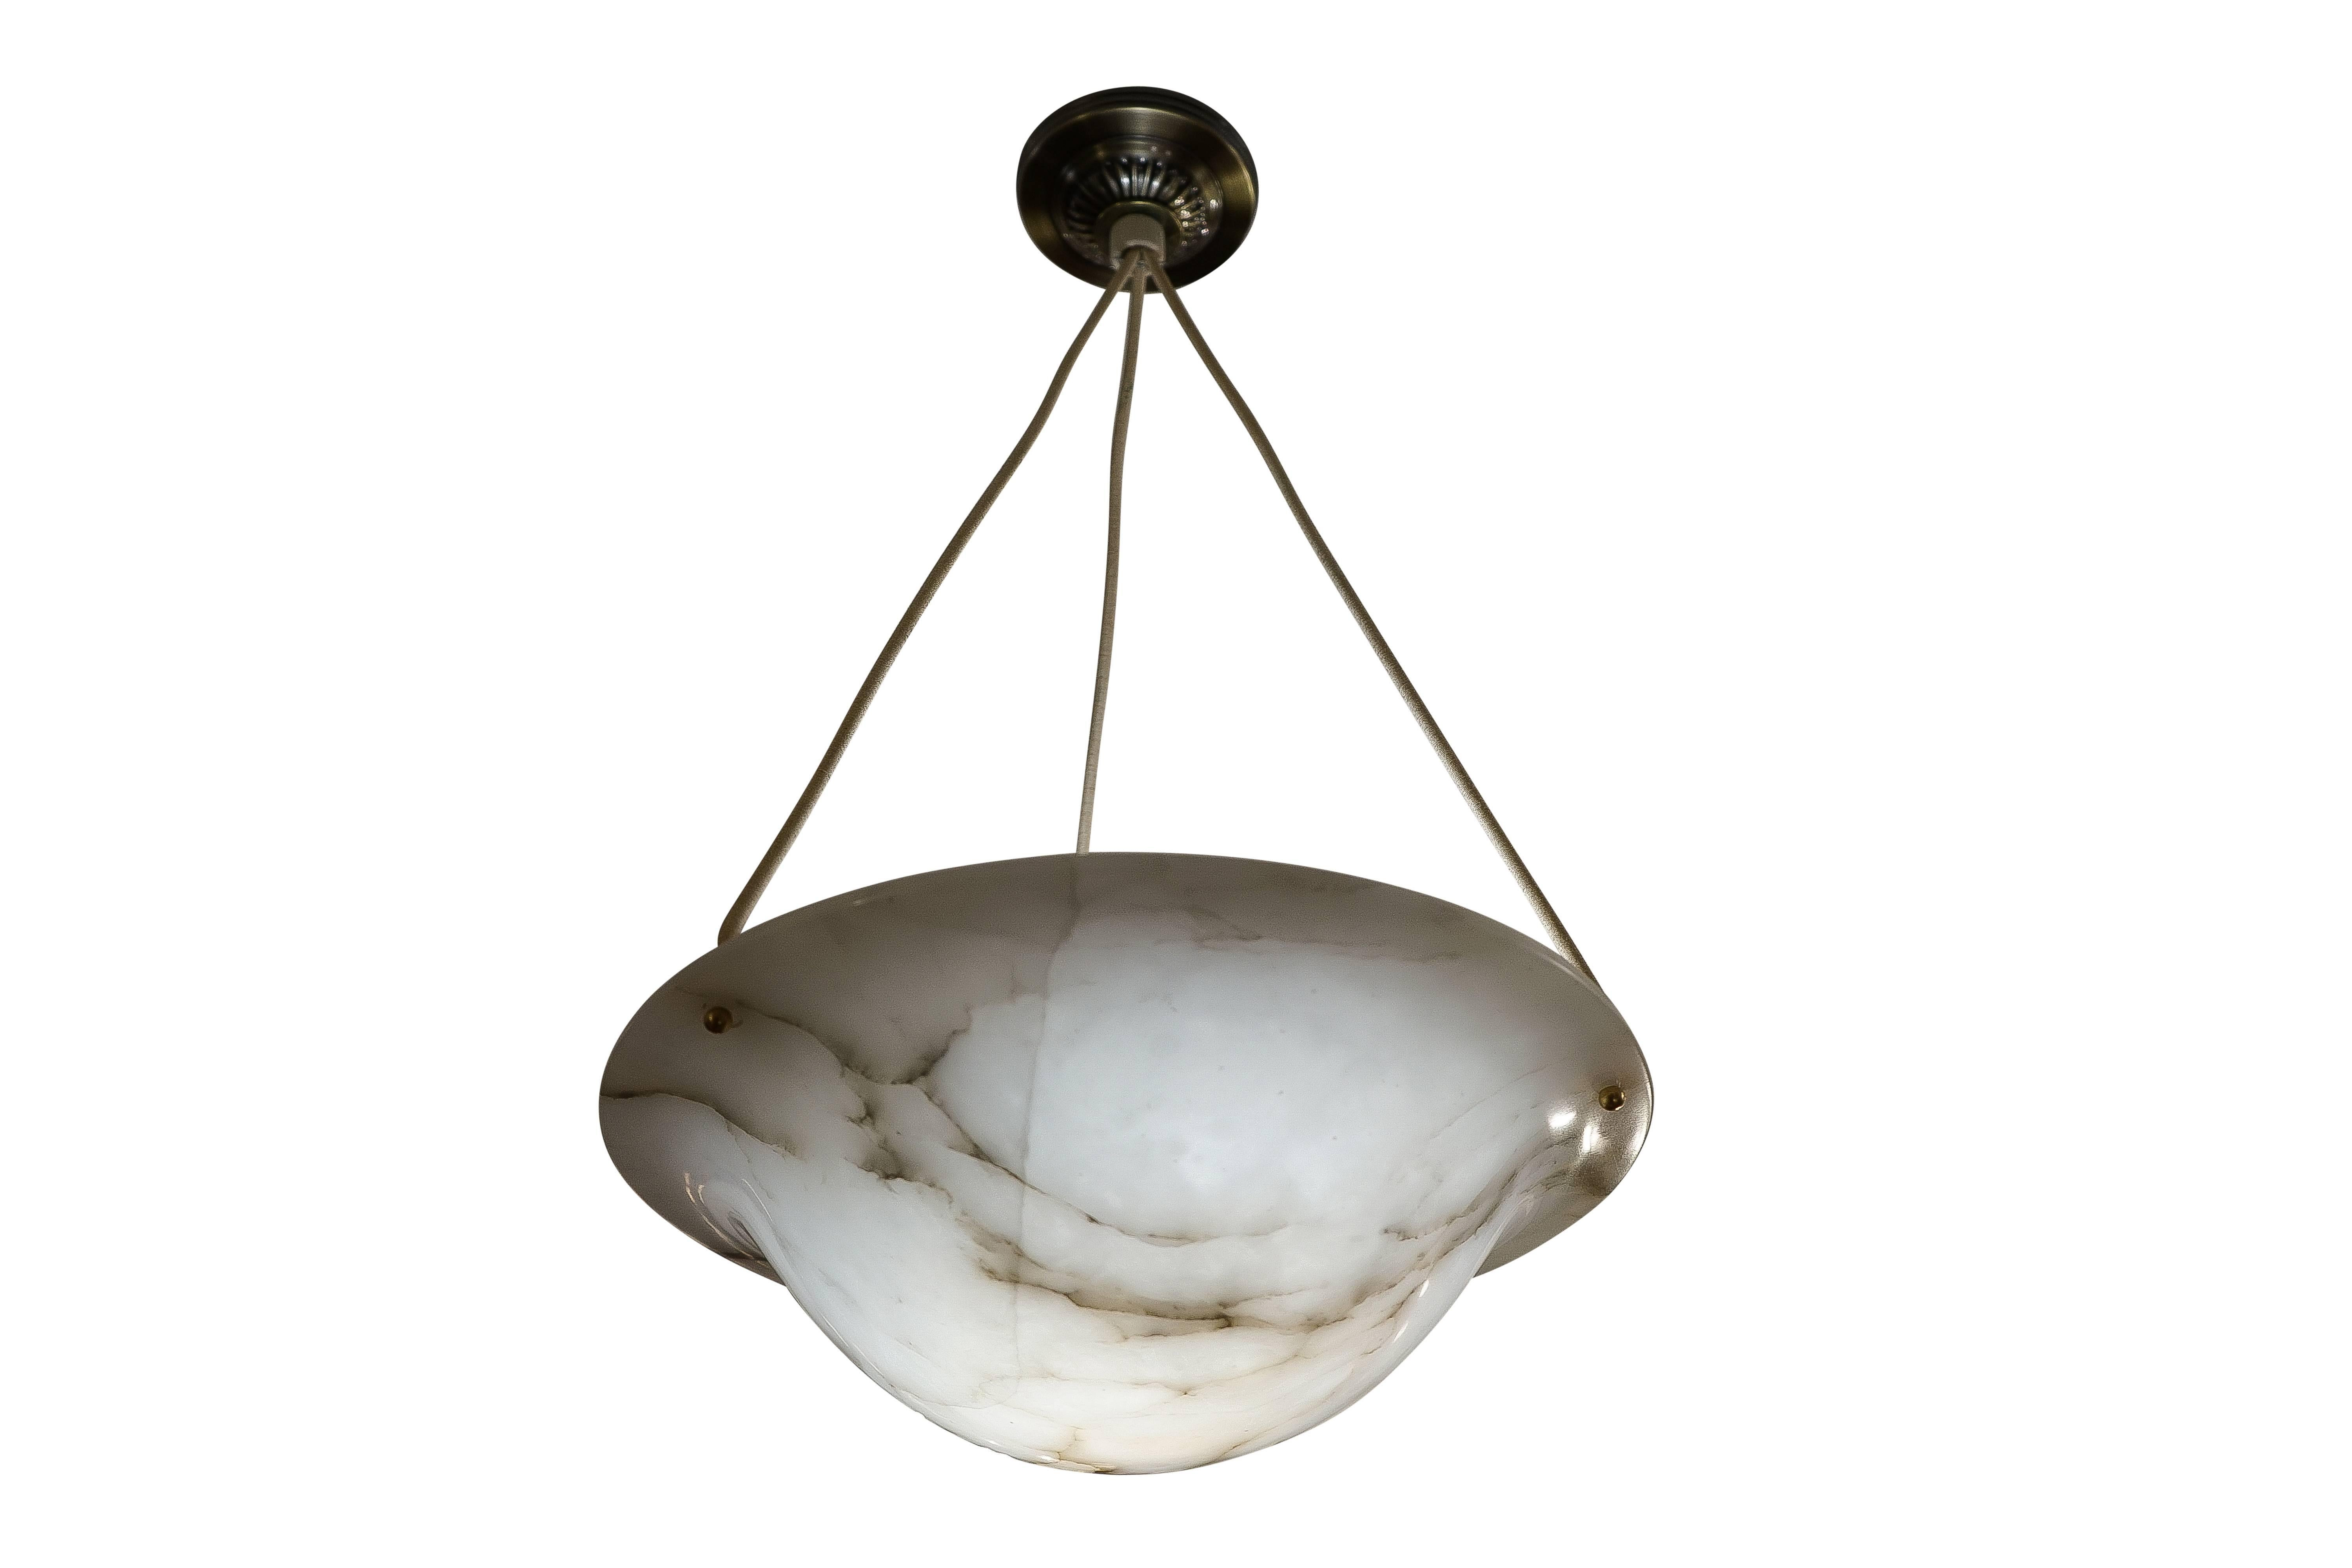 This creamy white alabaster with deep charcoal mineral veining, splays outward to cast soft light on the ceiling as well as diffusing the light through the translucent stone.  Suspended from three electrified ropes and the original brass canopy, the